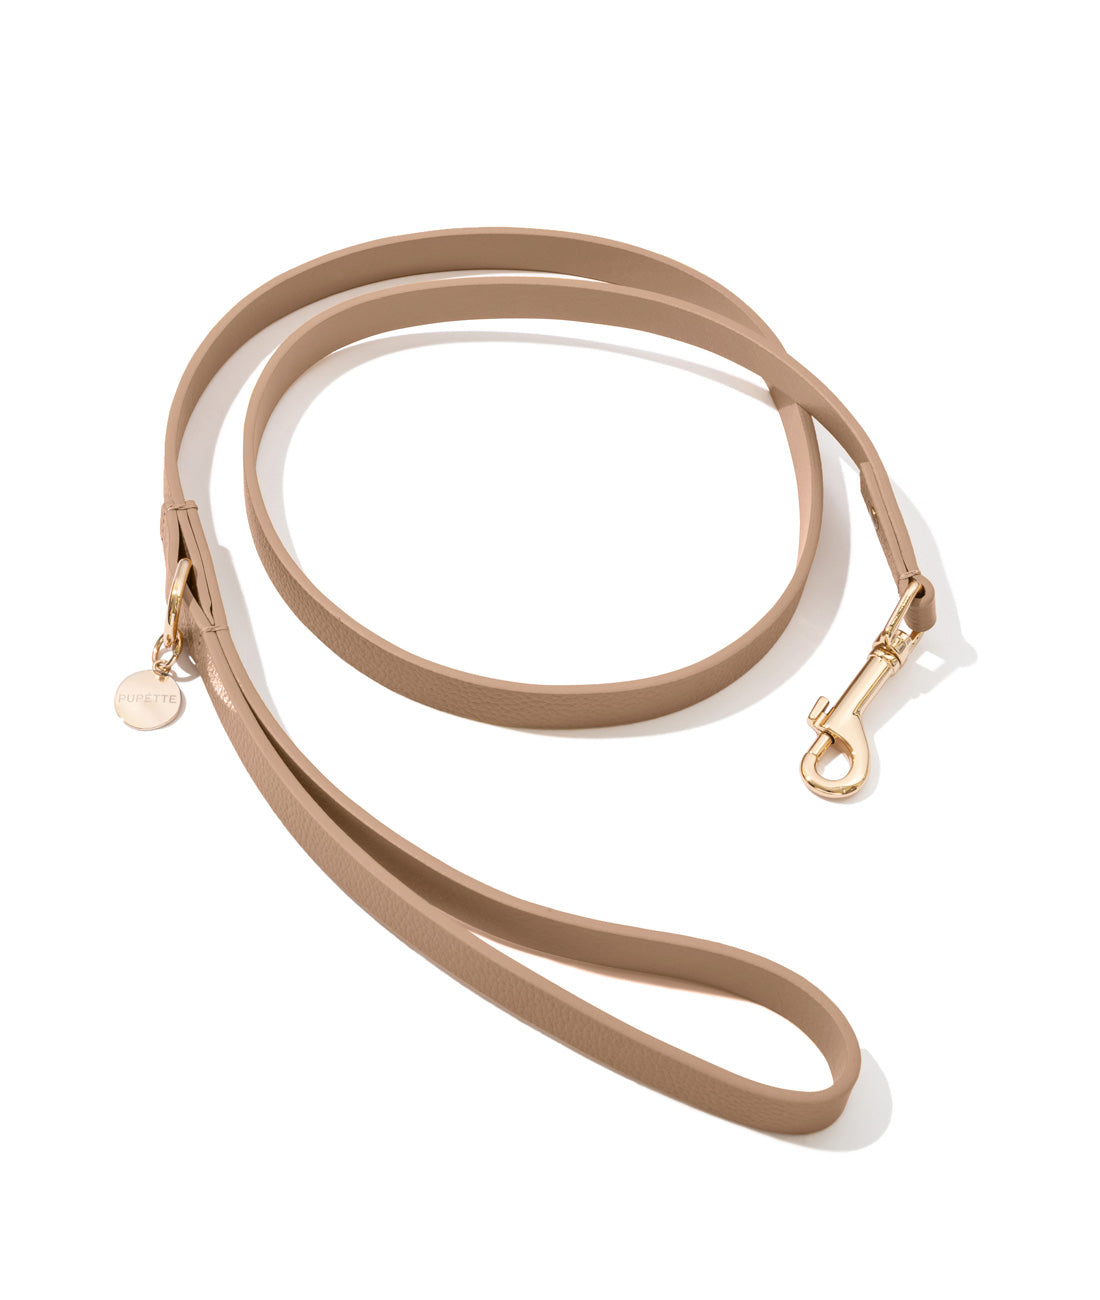 Luxe Leather Dog Lead - Beige